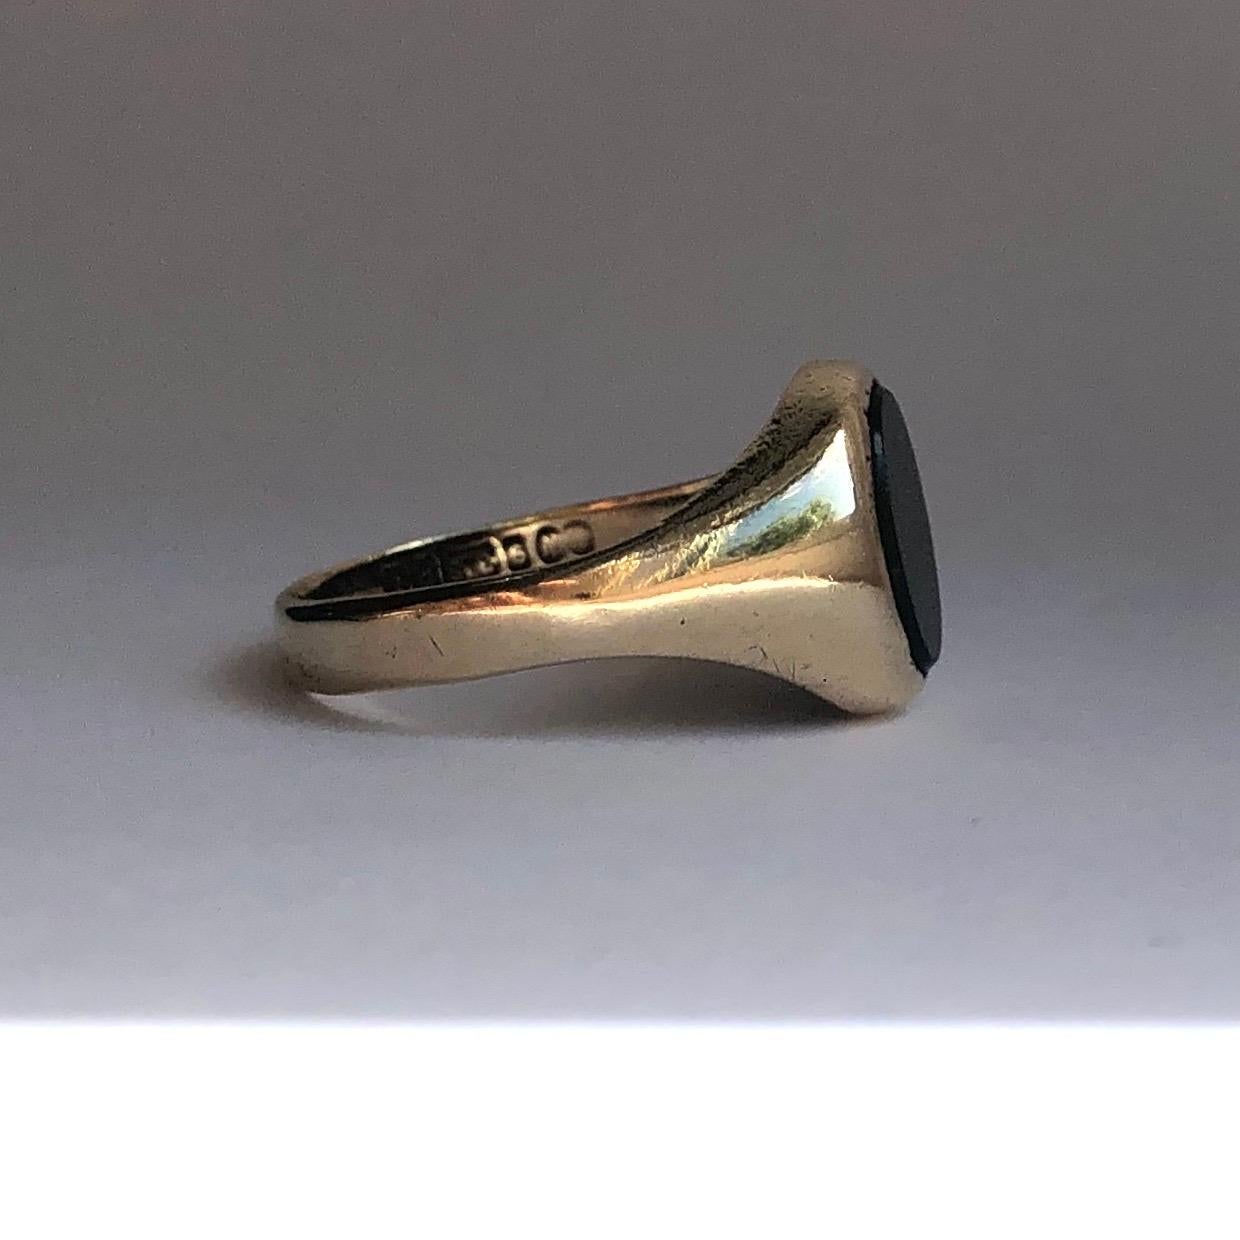 This classic style bloodstone signet ring is modelled out of smooth 9ct gold. The stone is set within the ring and is lovely and glossy. Made in Birmingham, England. 

Ring Size: O 1/2 or 7 1/2
Stone Dimensions: 10x8mm

Weight: 3g